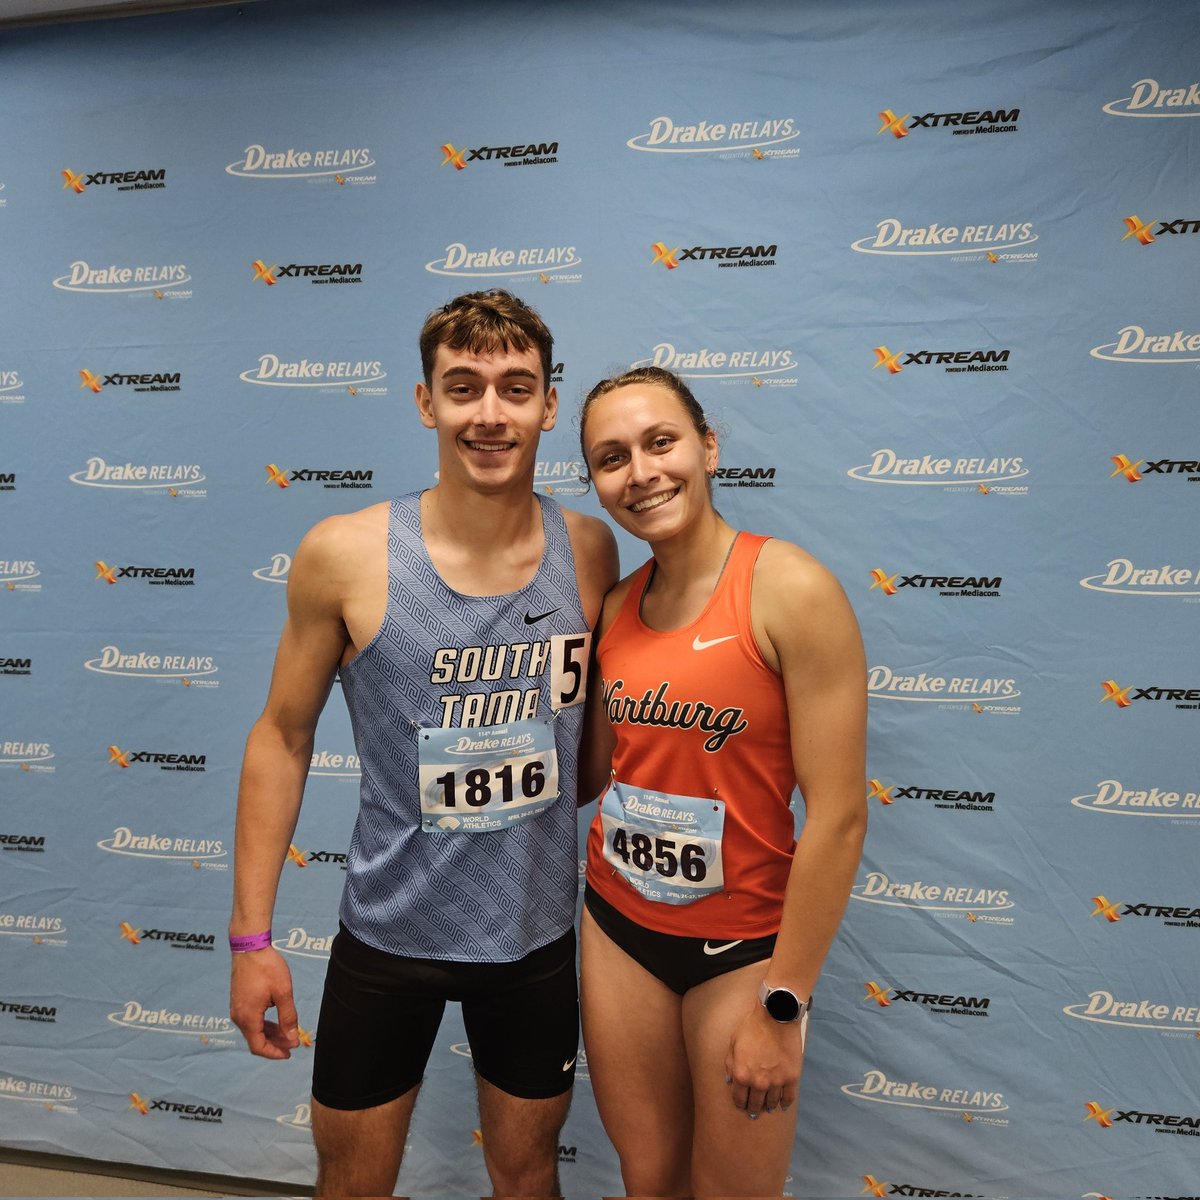 Tommy and JoJo Tyynismaa competed again at the Drake Relays this year. The South Tama senior was 4th in the 800 in 1:54.33 and stayed in the infield to root on older sister JoJo, who was 10th in the college 400m hurdles in 1:02 flat #iahstrk